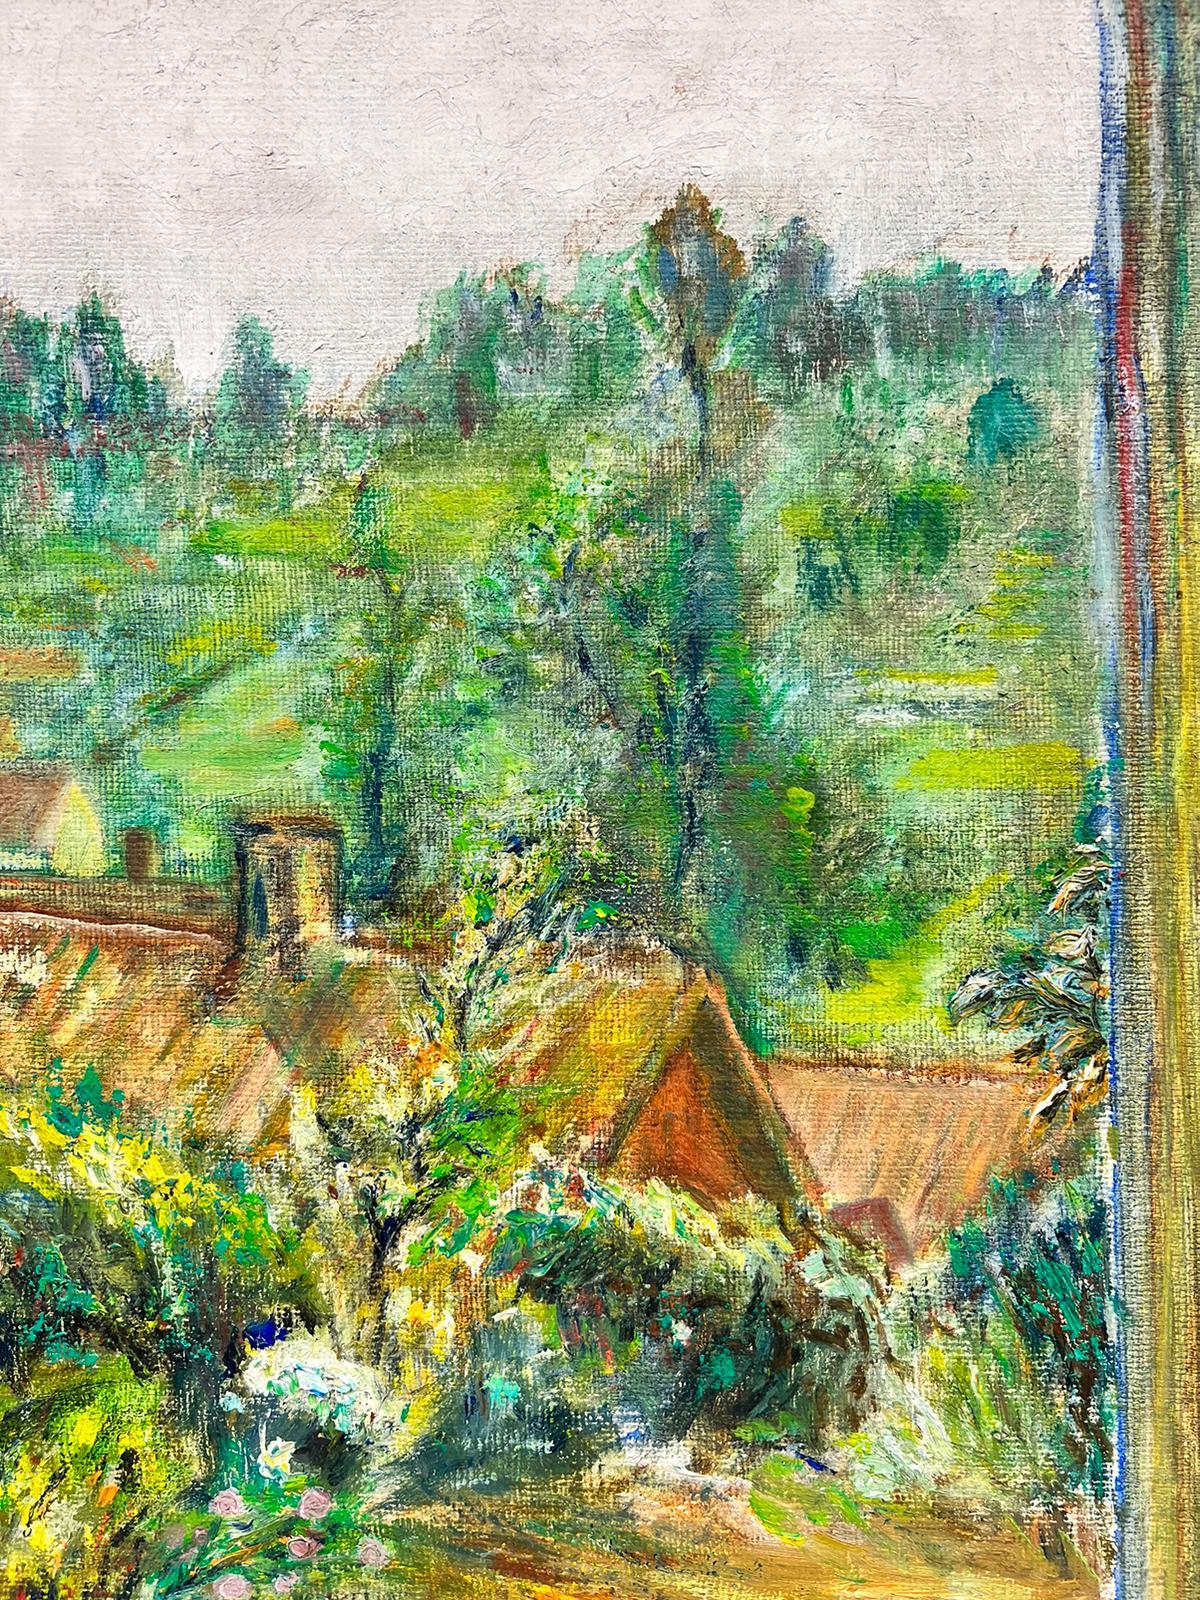 Artist/ School: French Impressionist early 1900's, most likely an unfinished sketch hence not signed. 

Title: Dreamy garden view, looking out of the window over a deep green and vibrant garden landscape

Medium: oil on canvas, unframed

Painting: